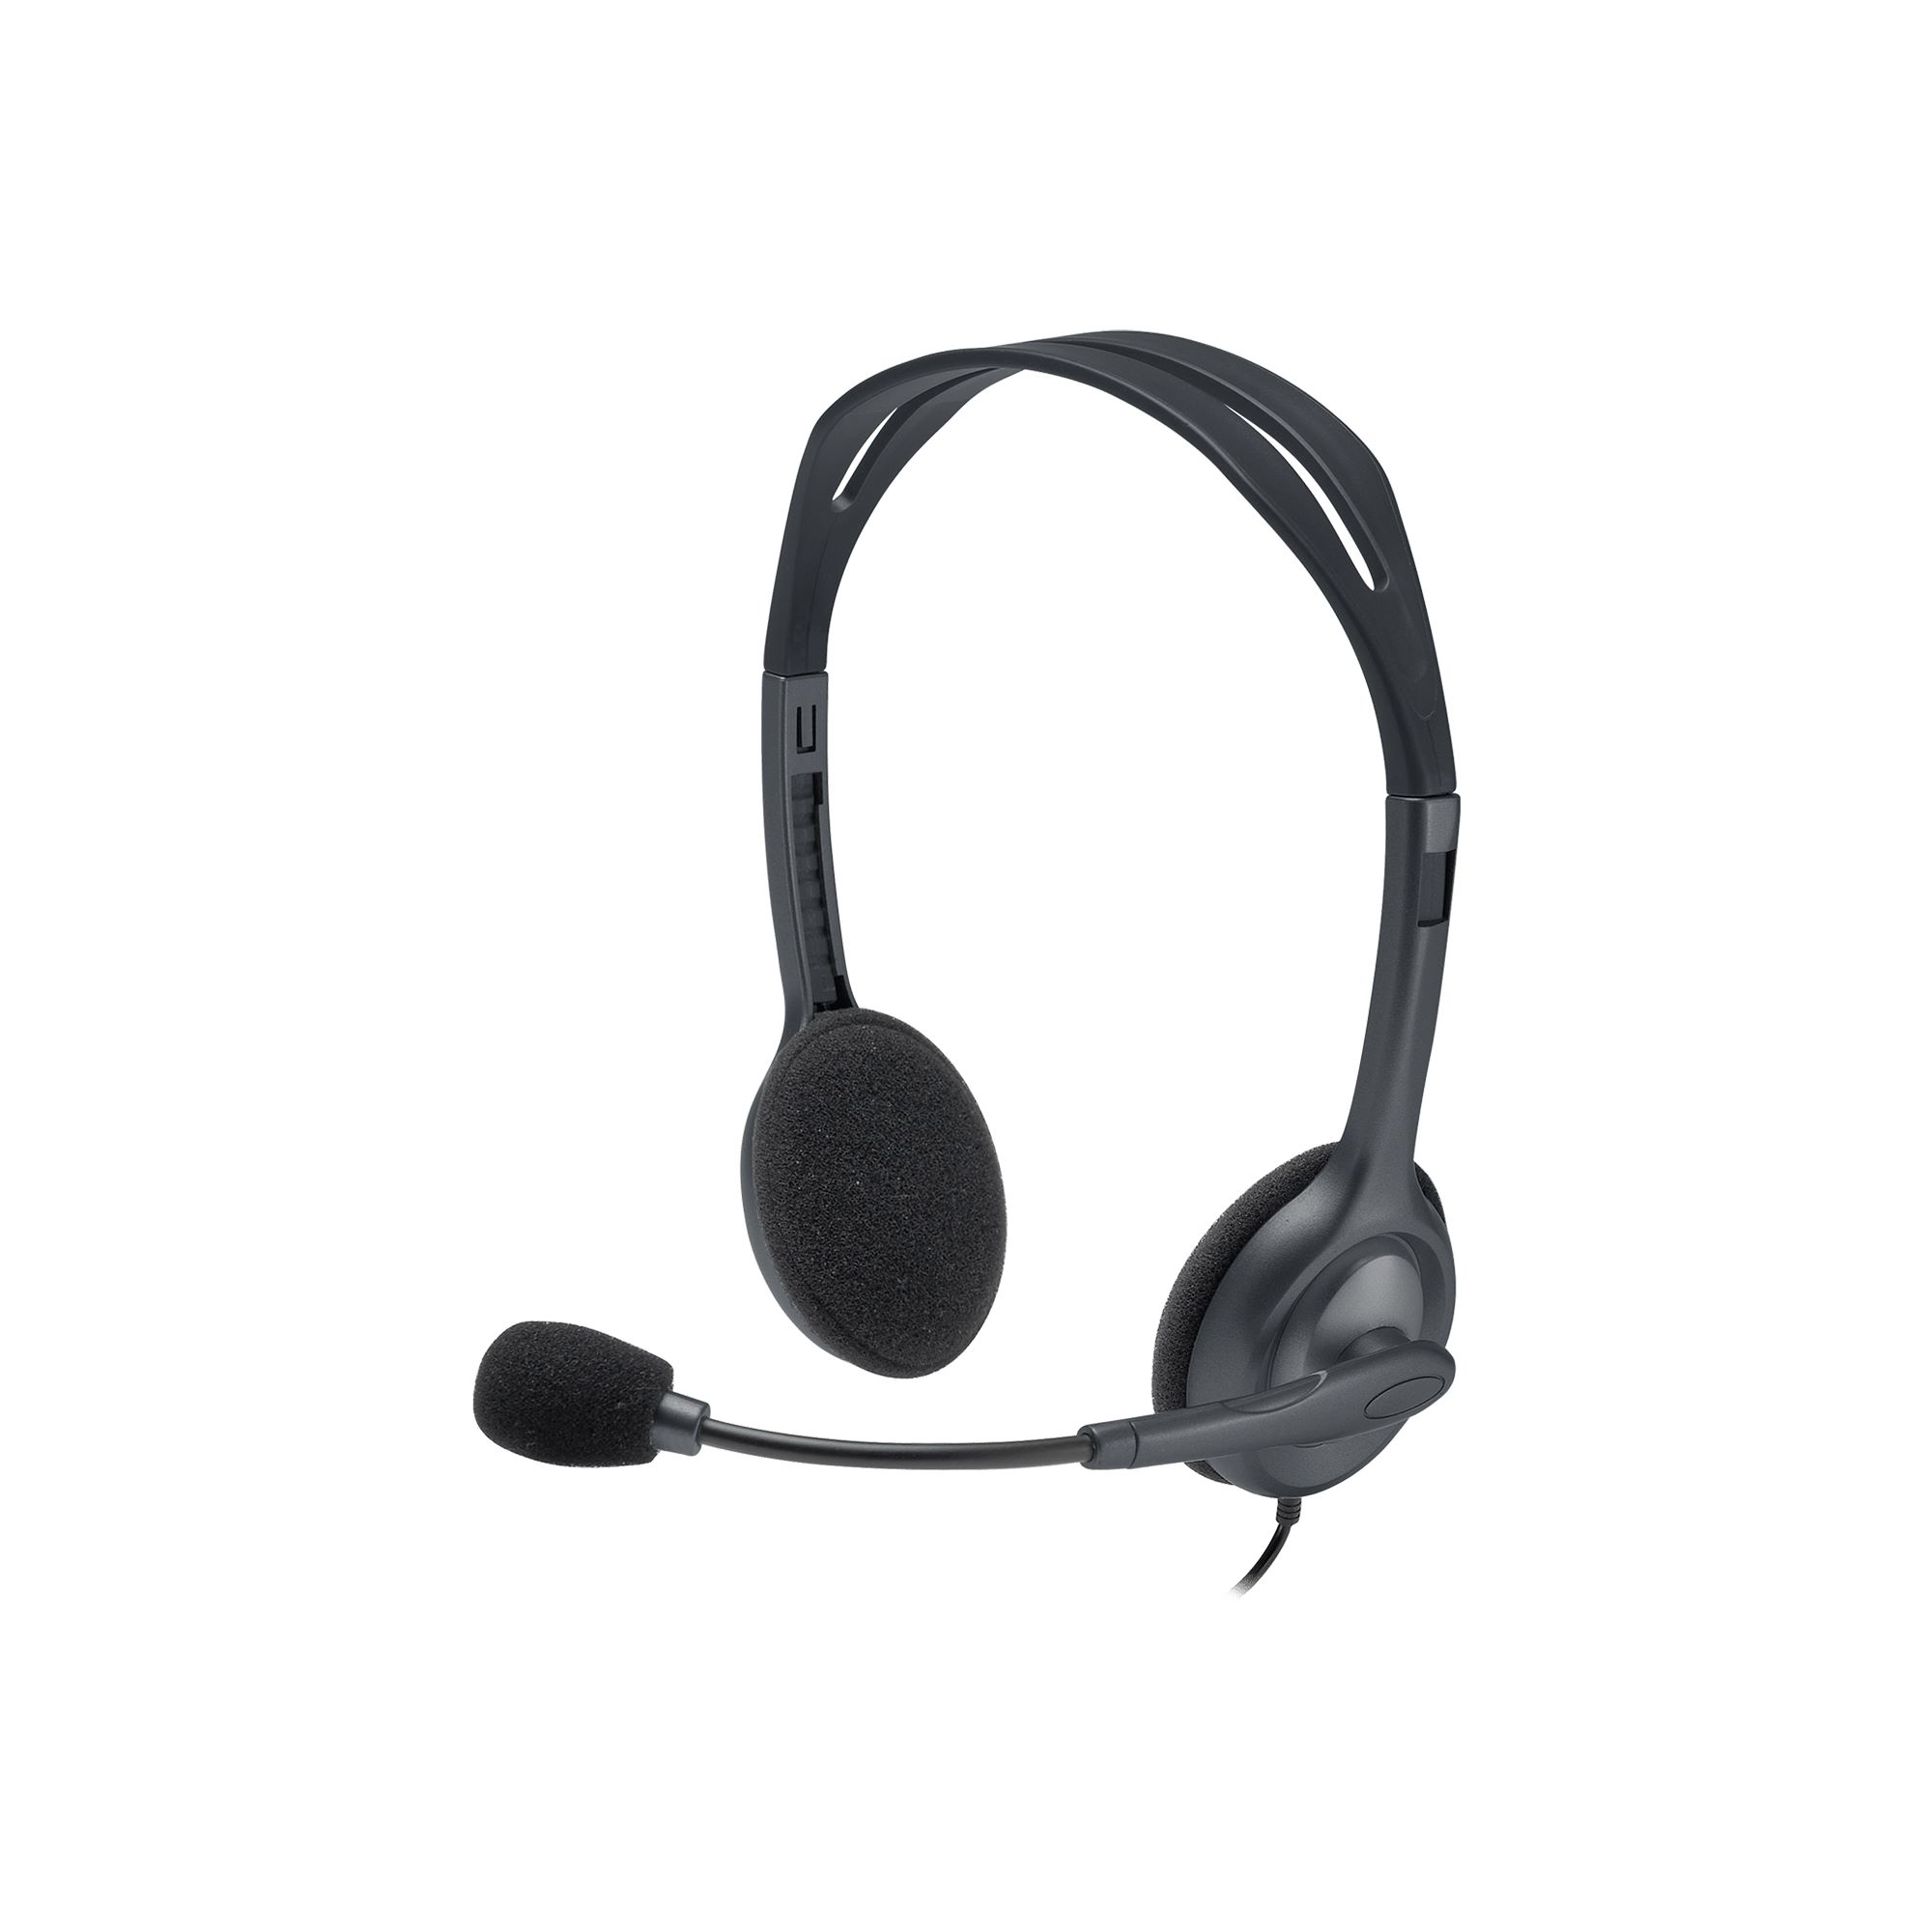 11 Best Logitech Headset With Microphone Usb for 2023